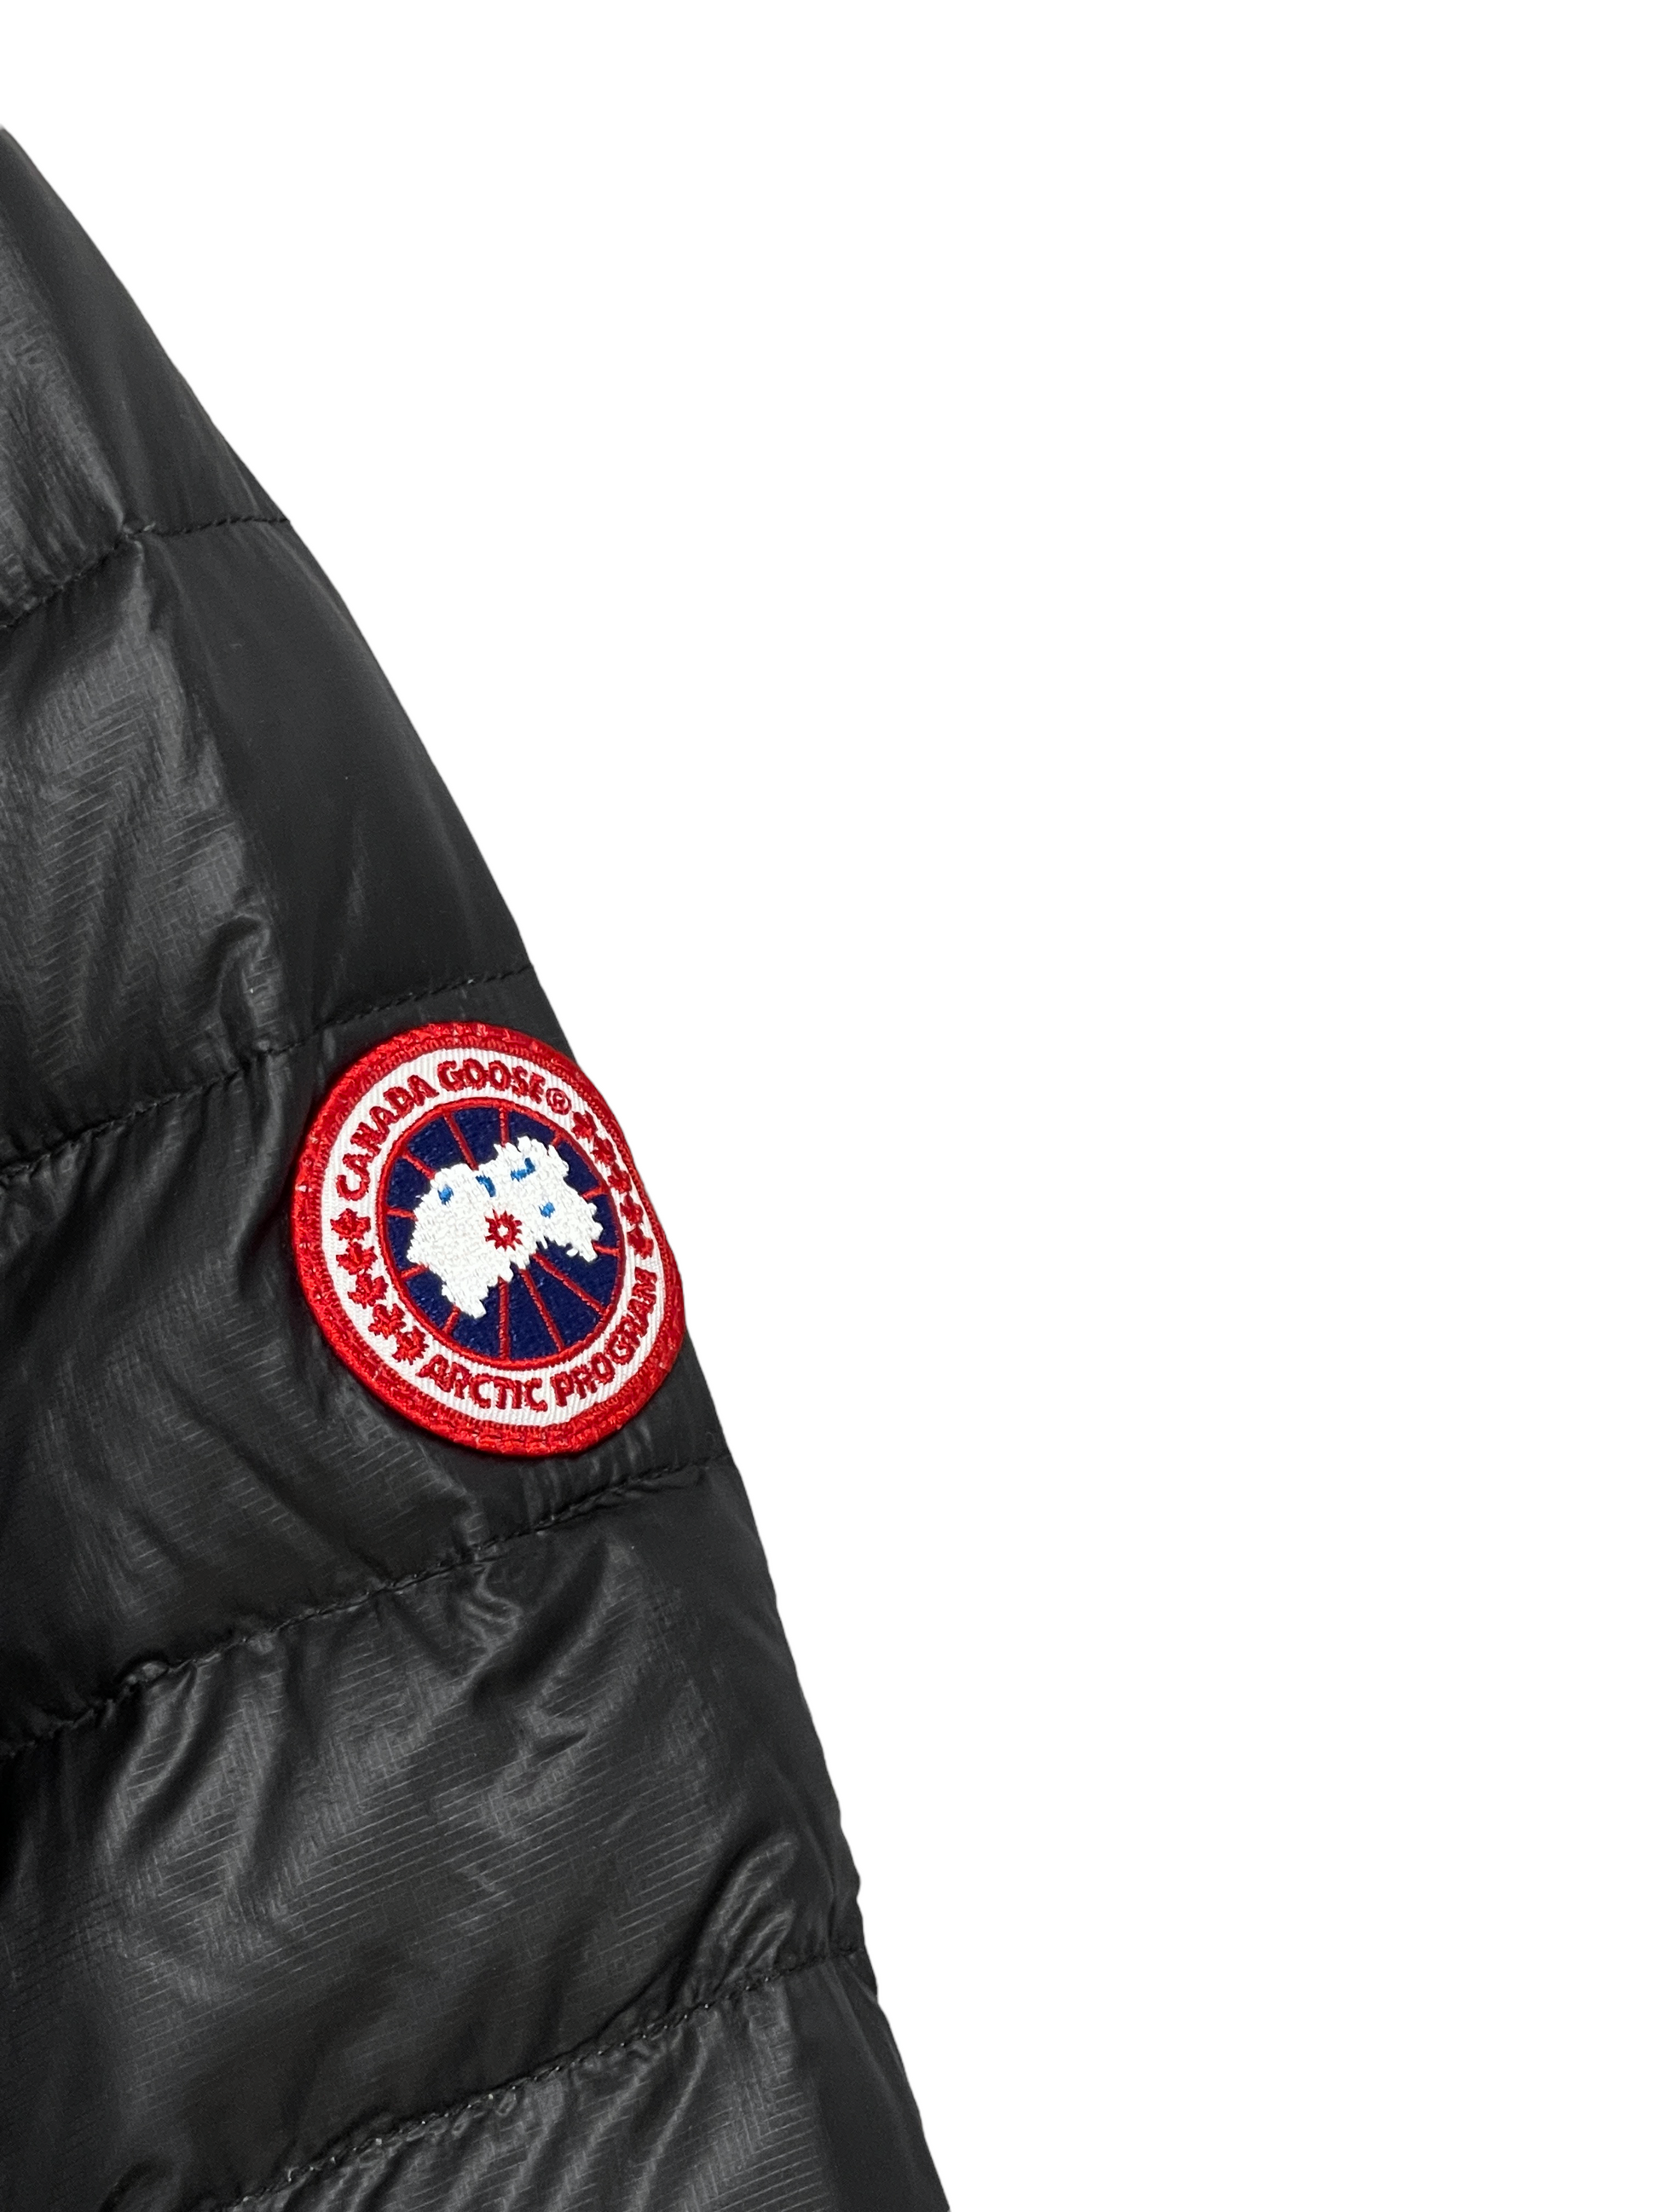 Canada Goose Black Hybridge Lite Down Filled Jacket Extra Large - Genuine Design Luxury Consignment for Men. New & Pre-Owned Clothing, Shoes, & Accessories. Calgary, Canada